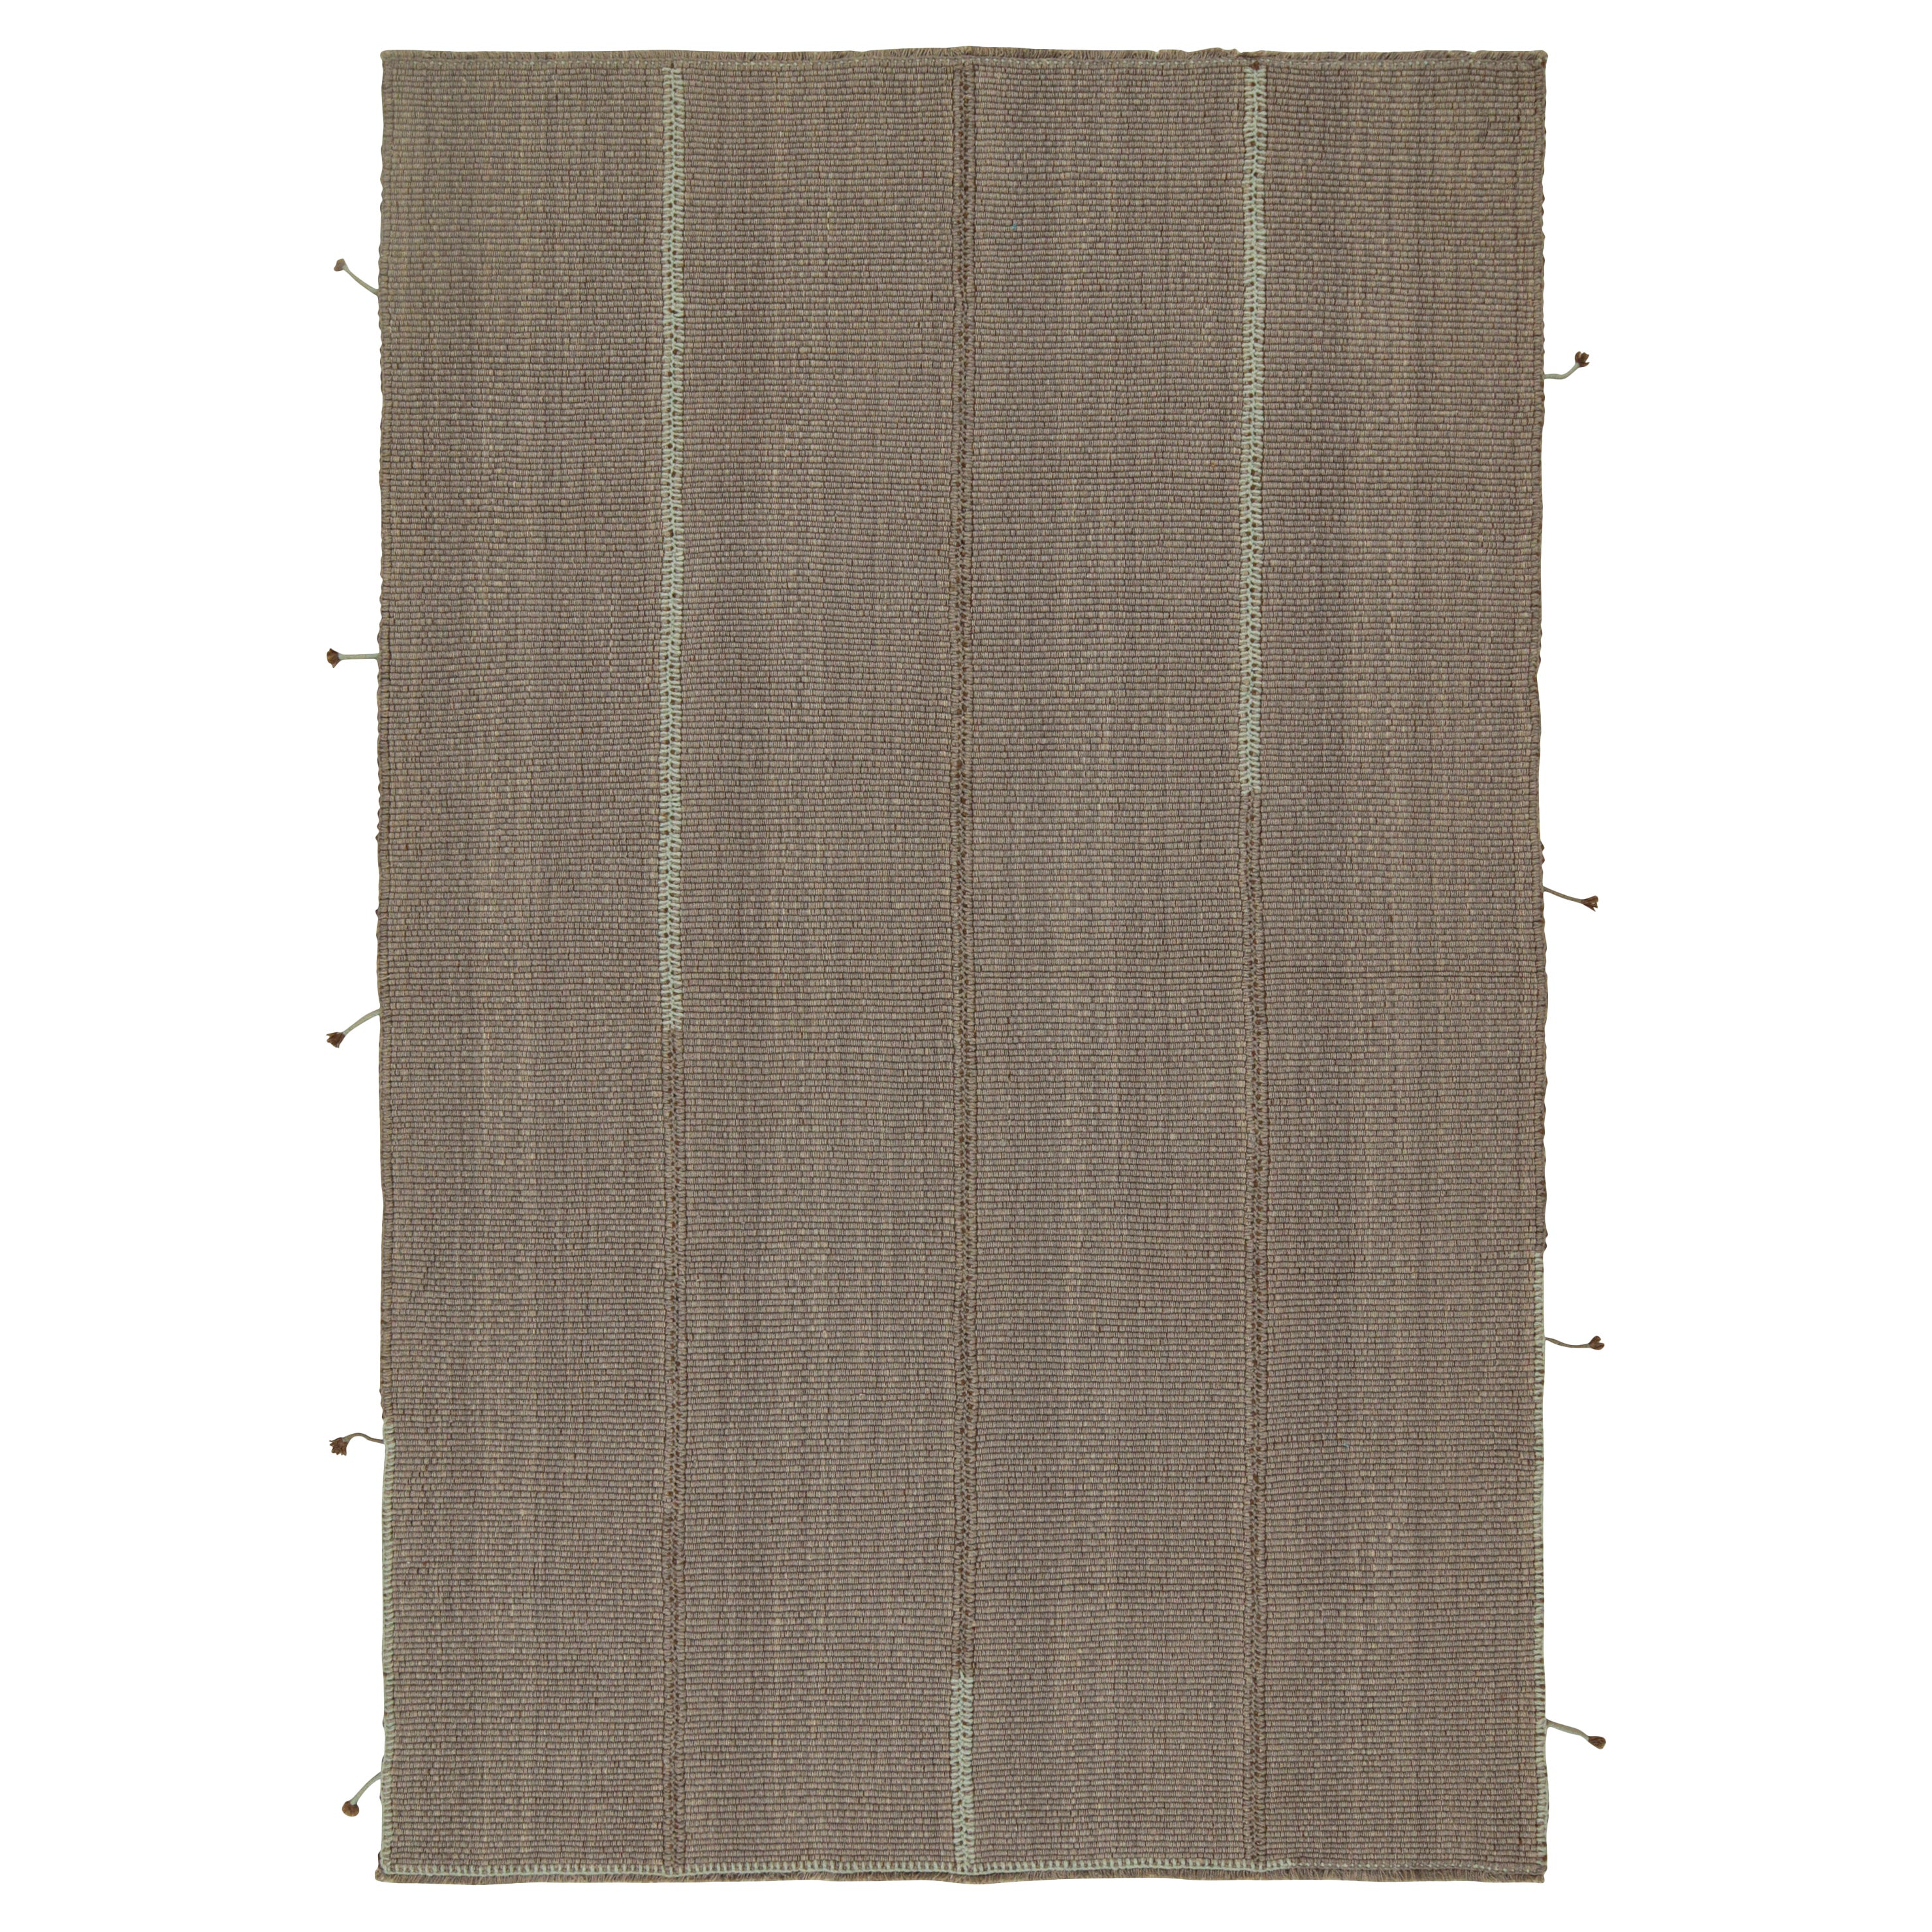 Rug & Kilim’s Contemporary Kilim Rug in Grey with Brown and Blue Accents